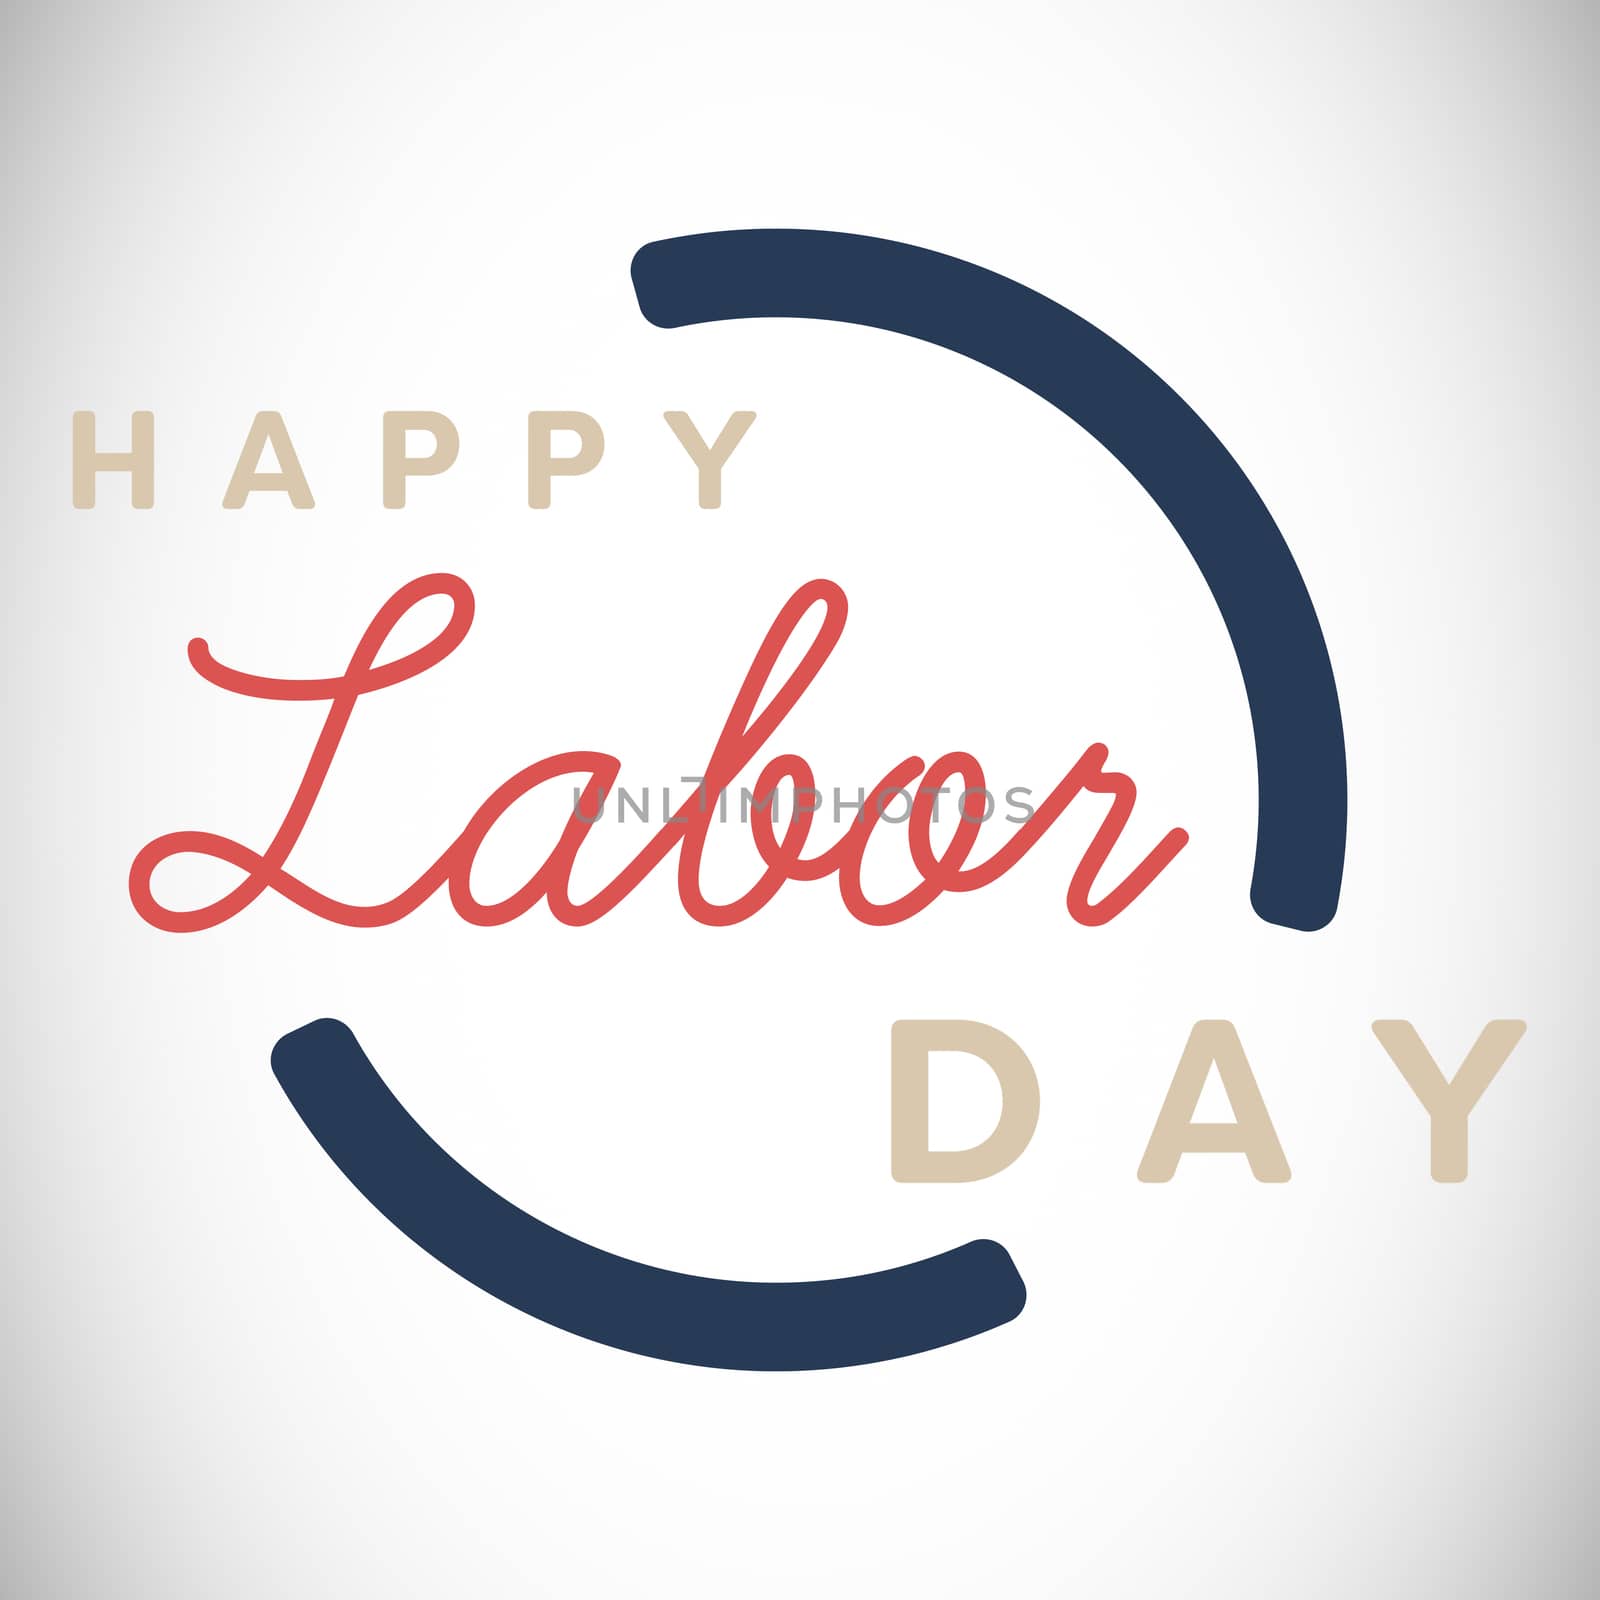 Digital composite image of happy labor day text with blue outline by Wavebreakmedia